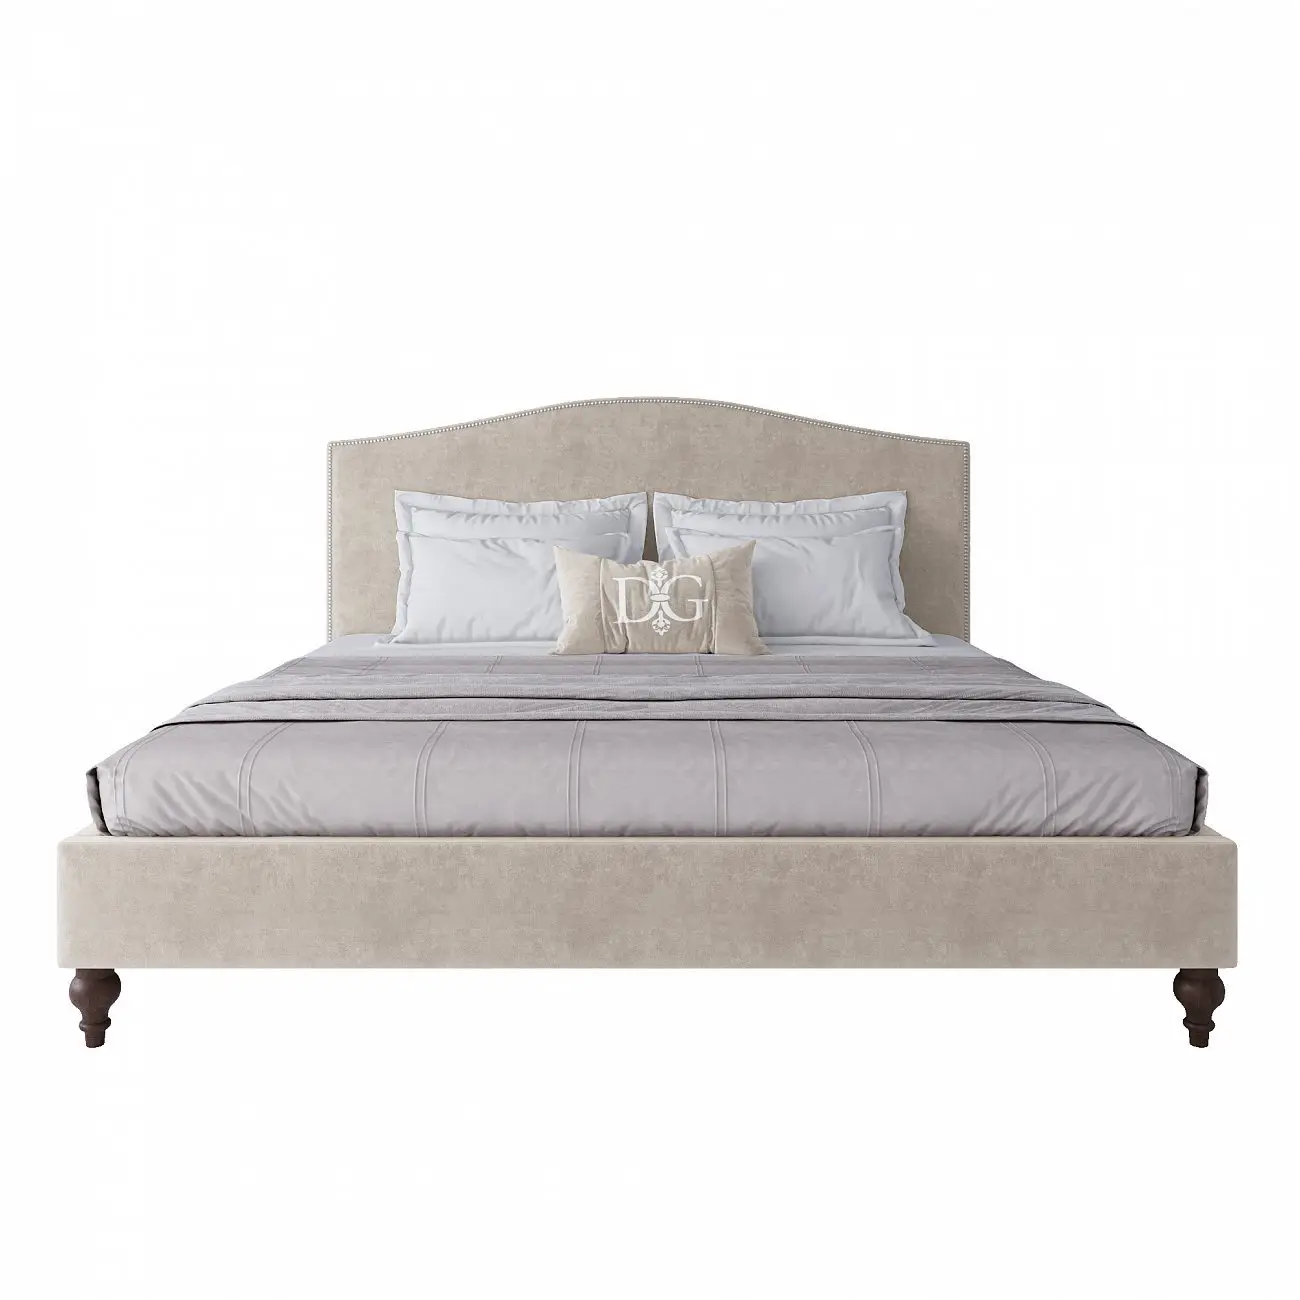 Double bed with upholstered headboard 180x200 cm beige Fleurie